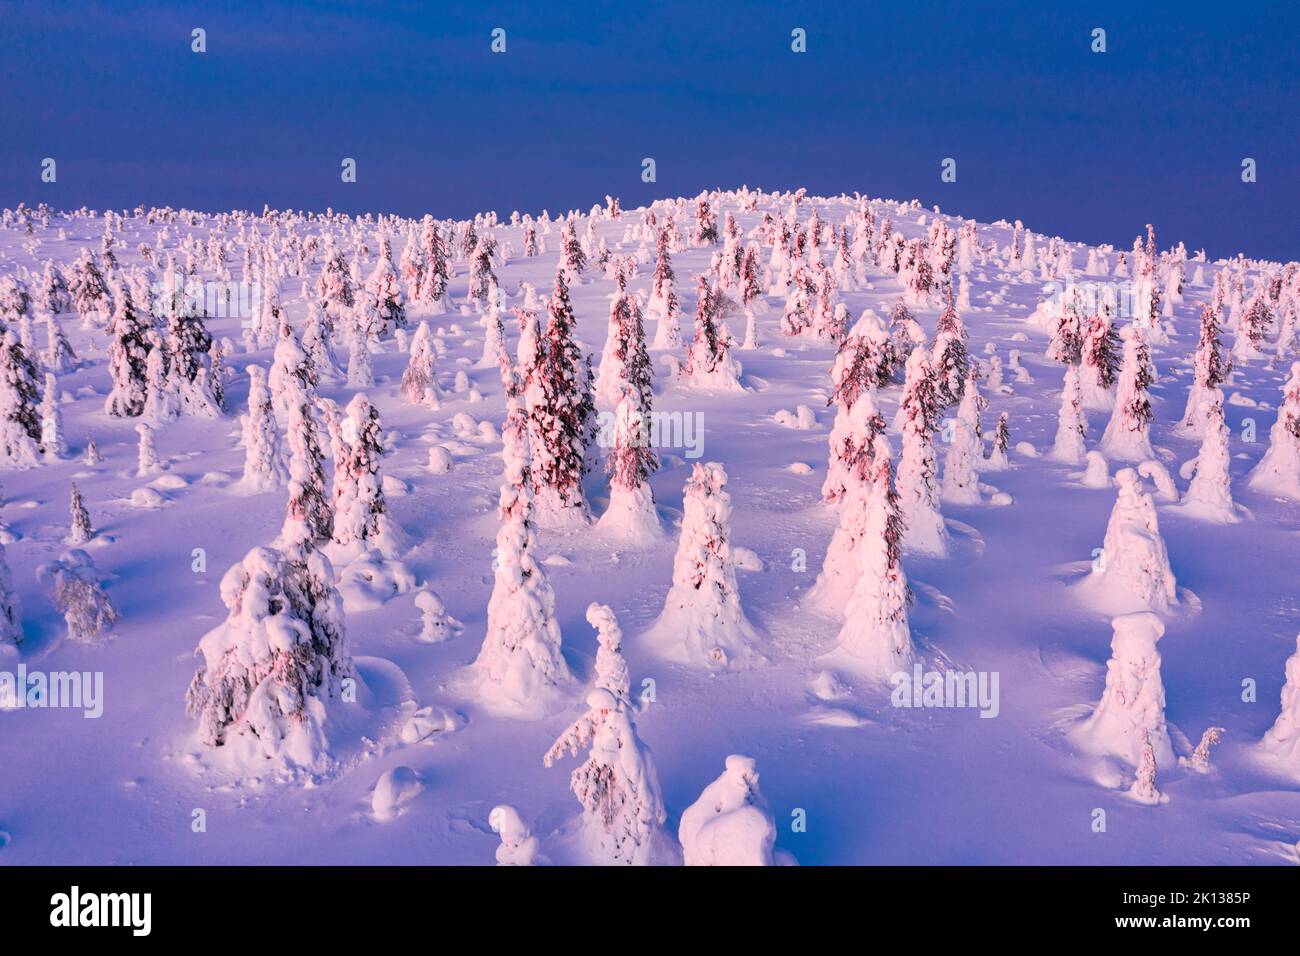 Ice sculptures in the Arctic forest covered with snow at dawn, Riisitunturi National Park, Lapland, Finland, Europe Stock Photo